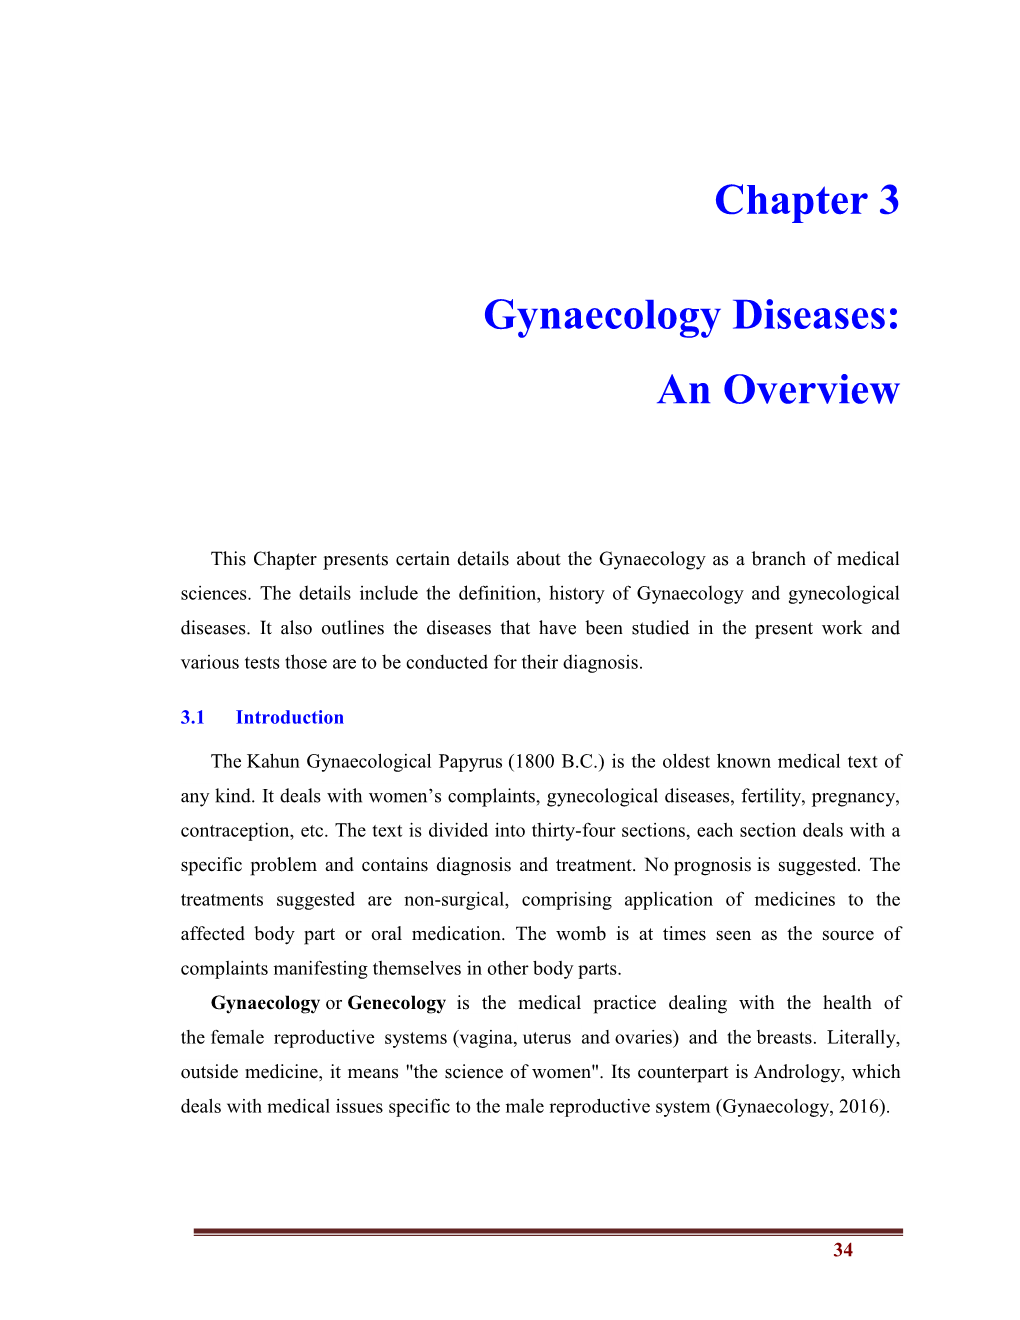 Chapter 3 Gynaecology Diseases: an Overview